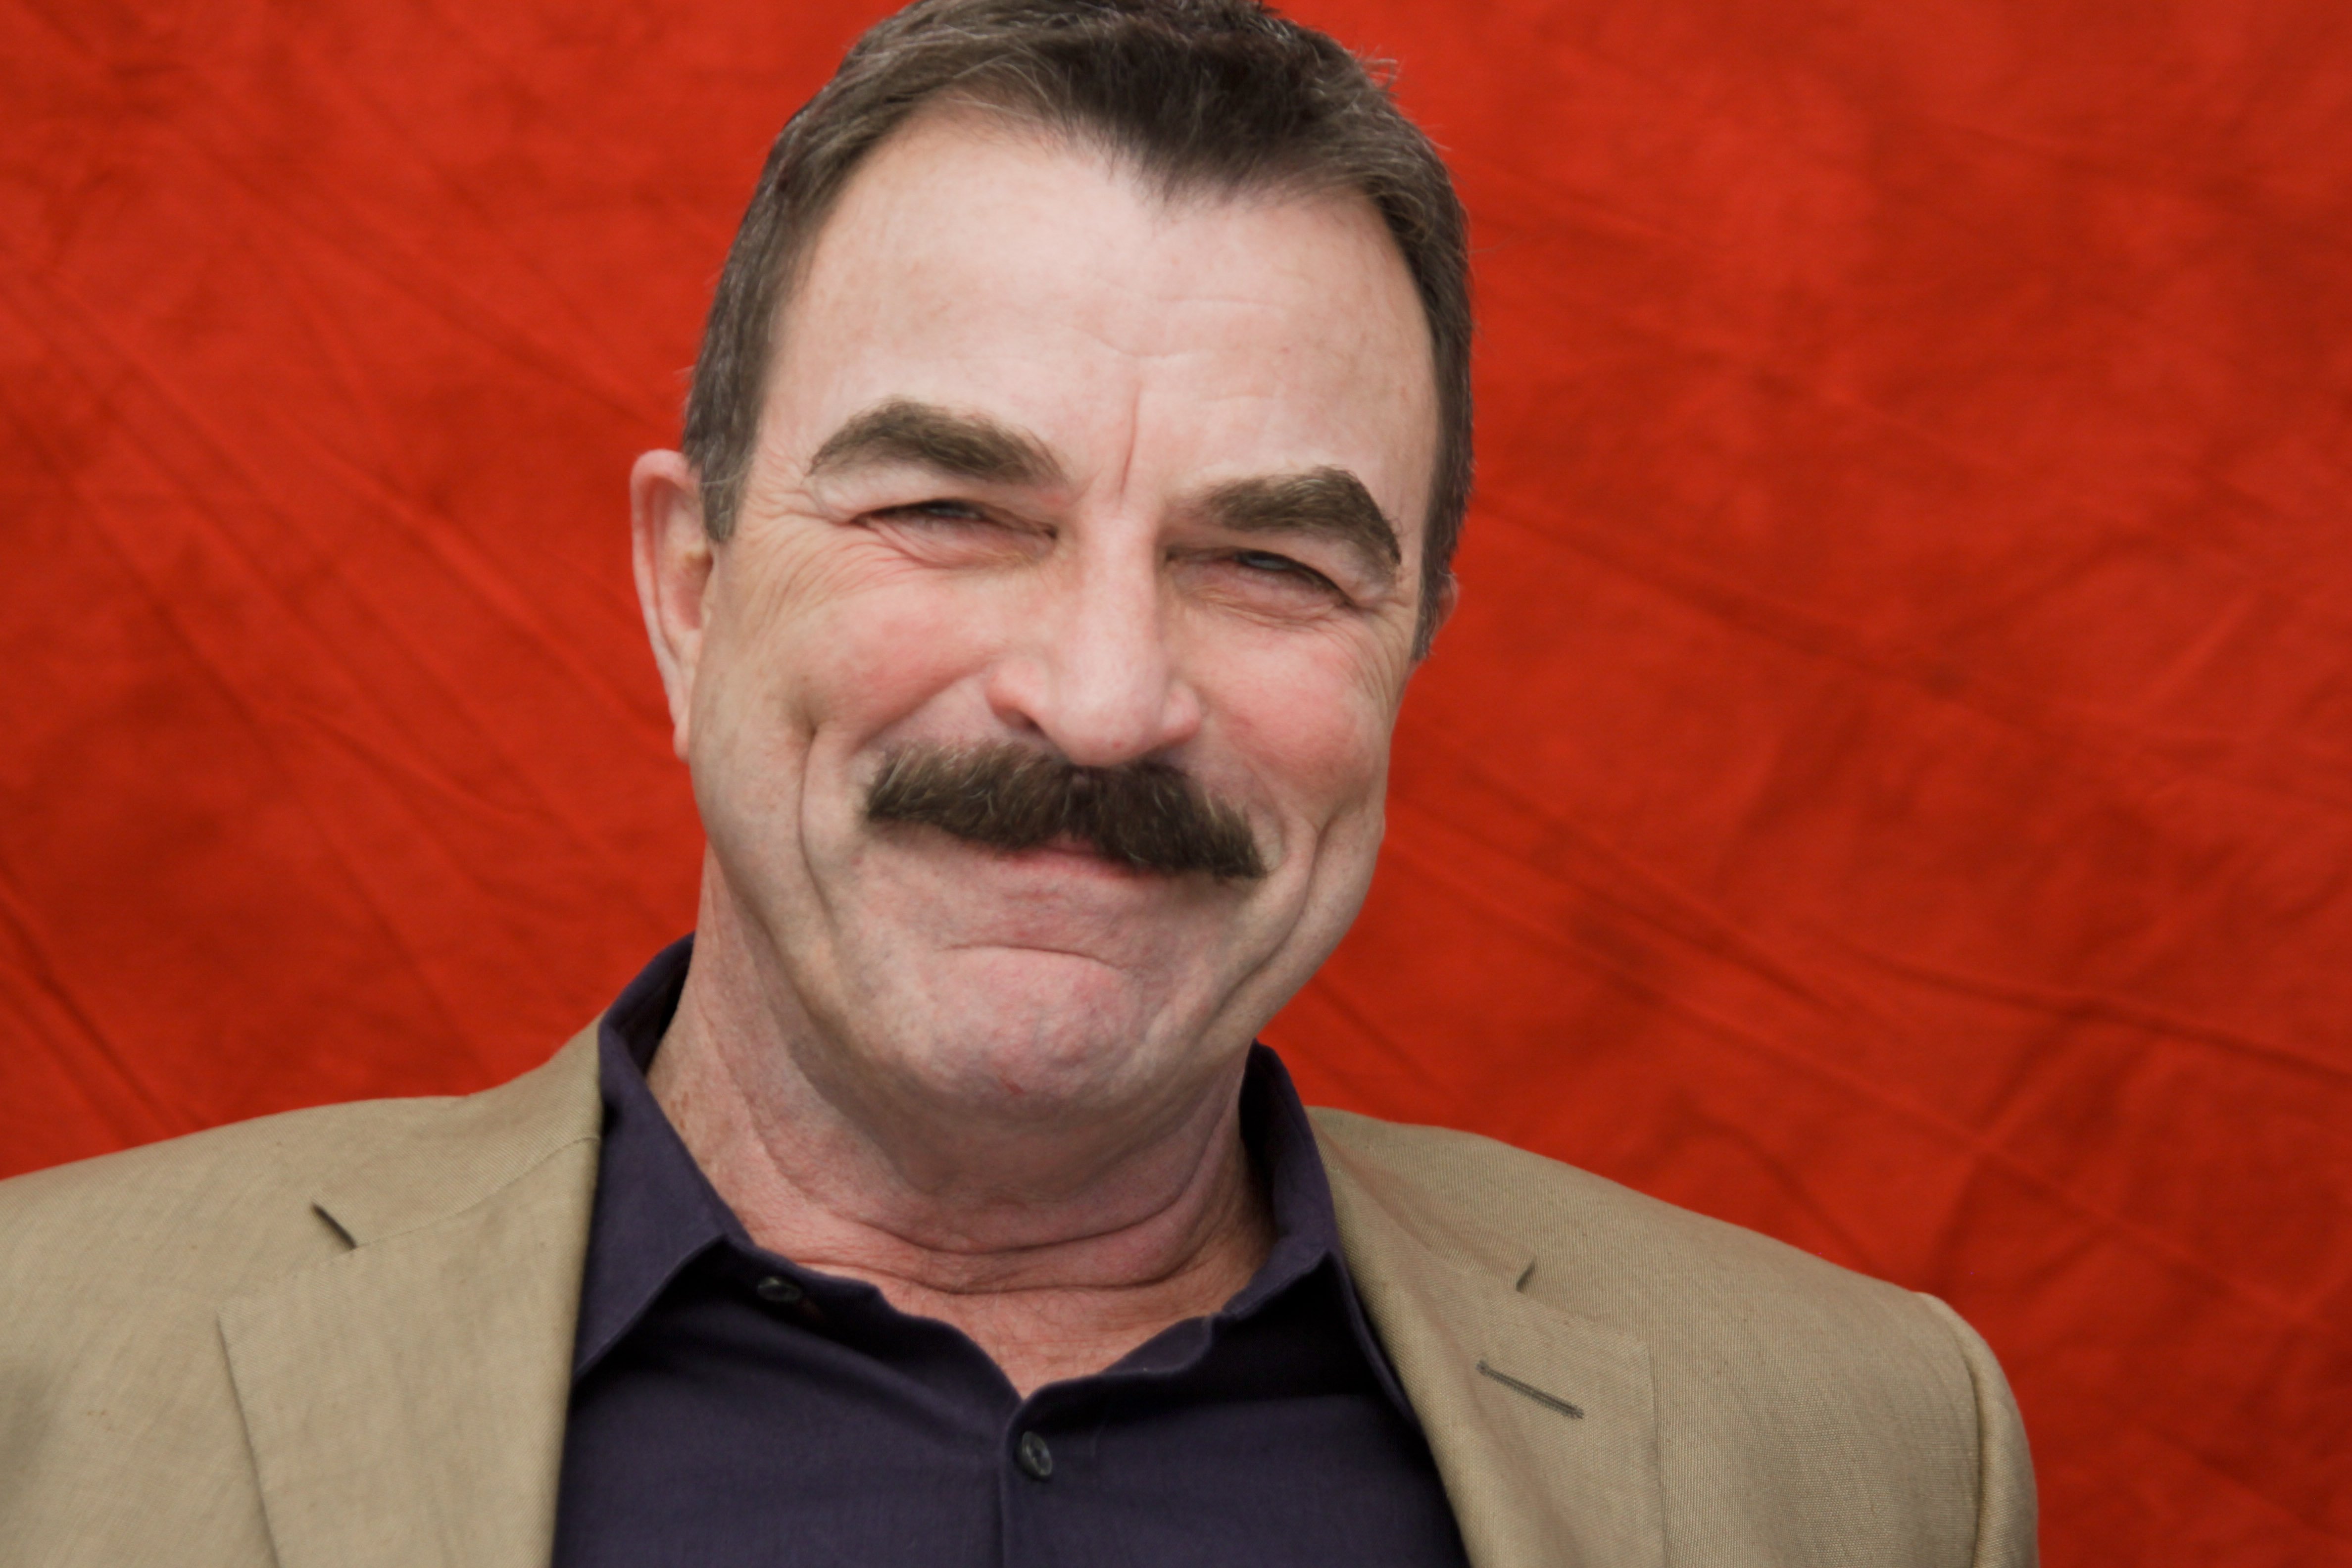 Tom Selleck in Hollywood in 2010 | Source: Getty Images